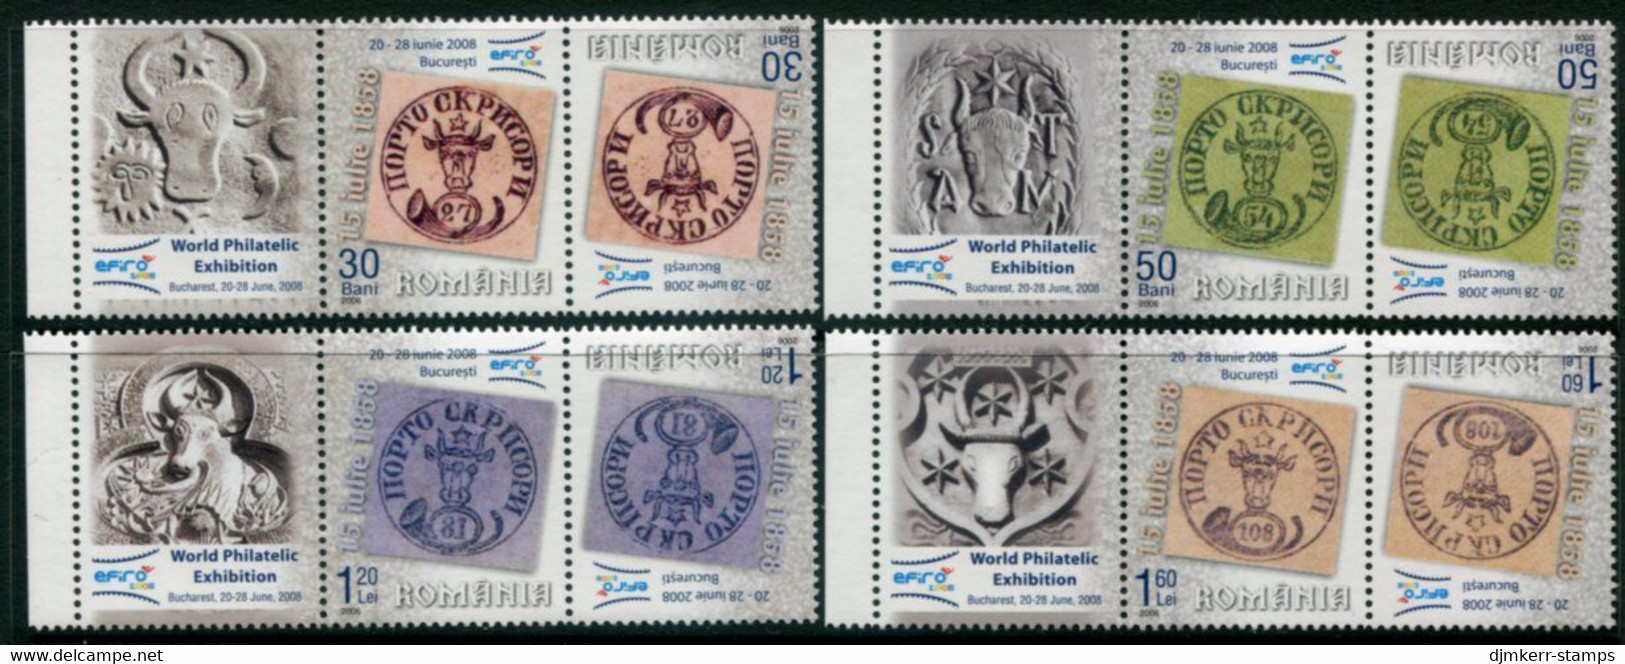 ROMANIA 2006 EFIRO Philatelic Exhibition Set Of 4 Tete-beche Pairs With Labels MNH / **.  Michel 6118-21 Kd + Zf - Nuovi